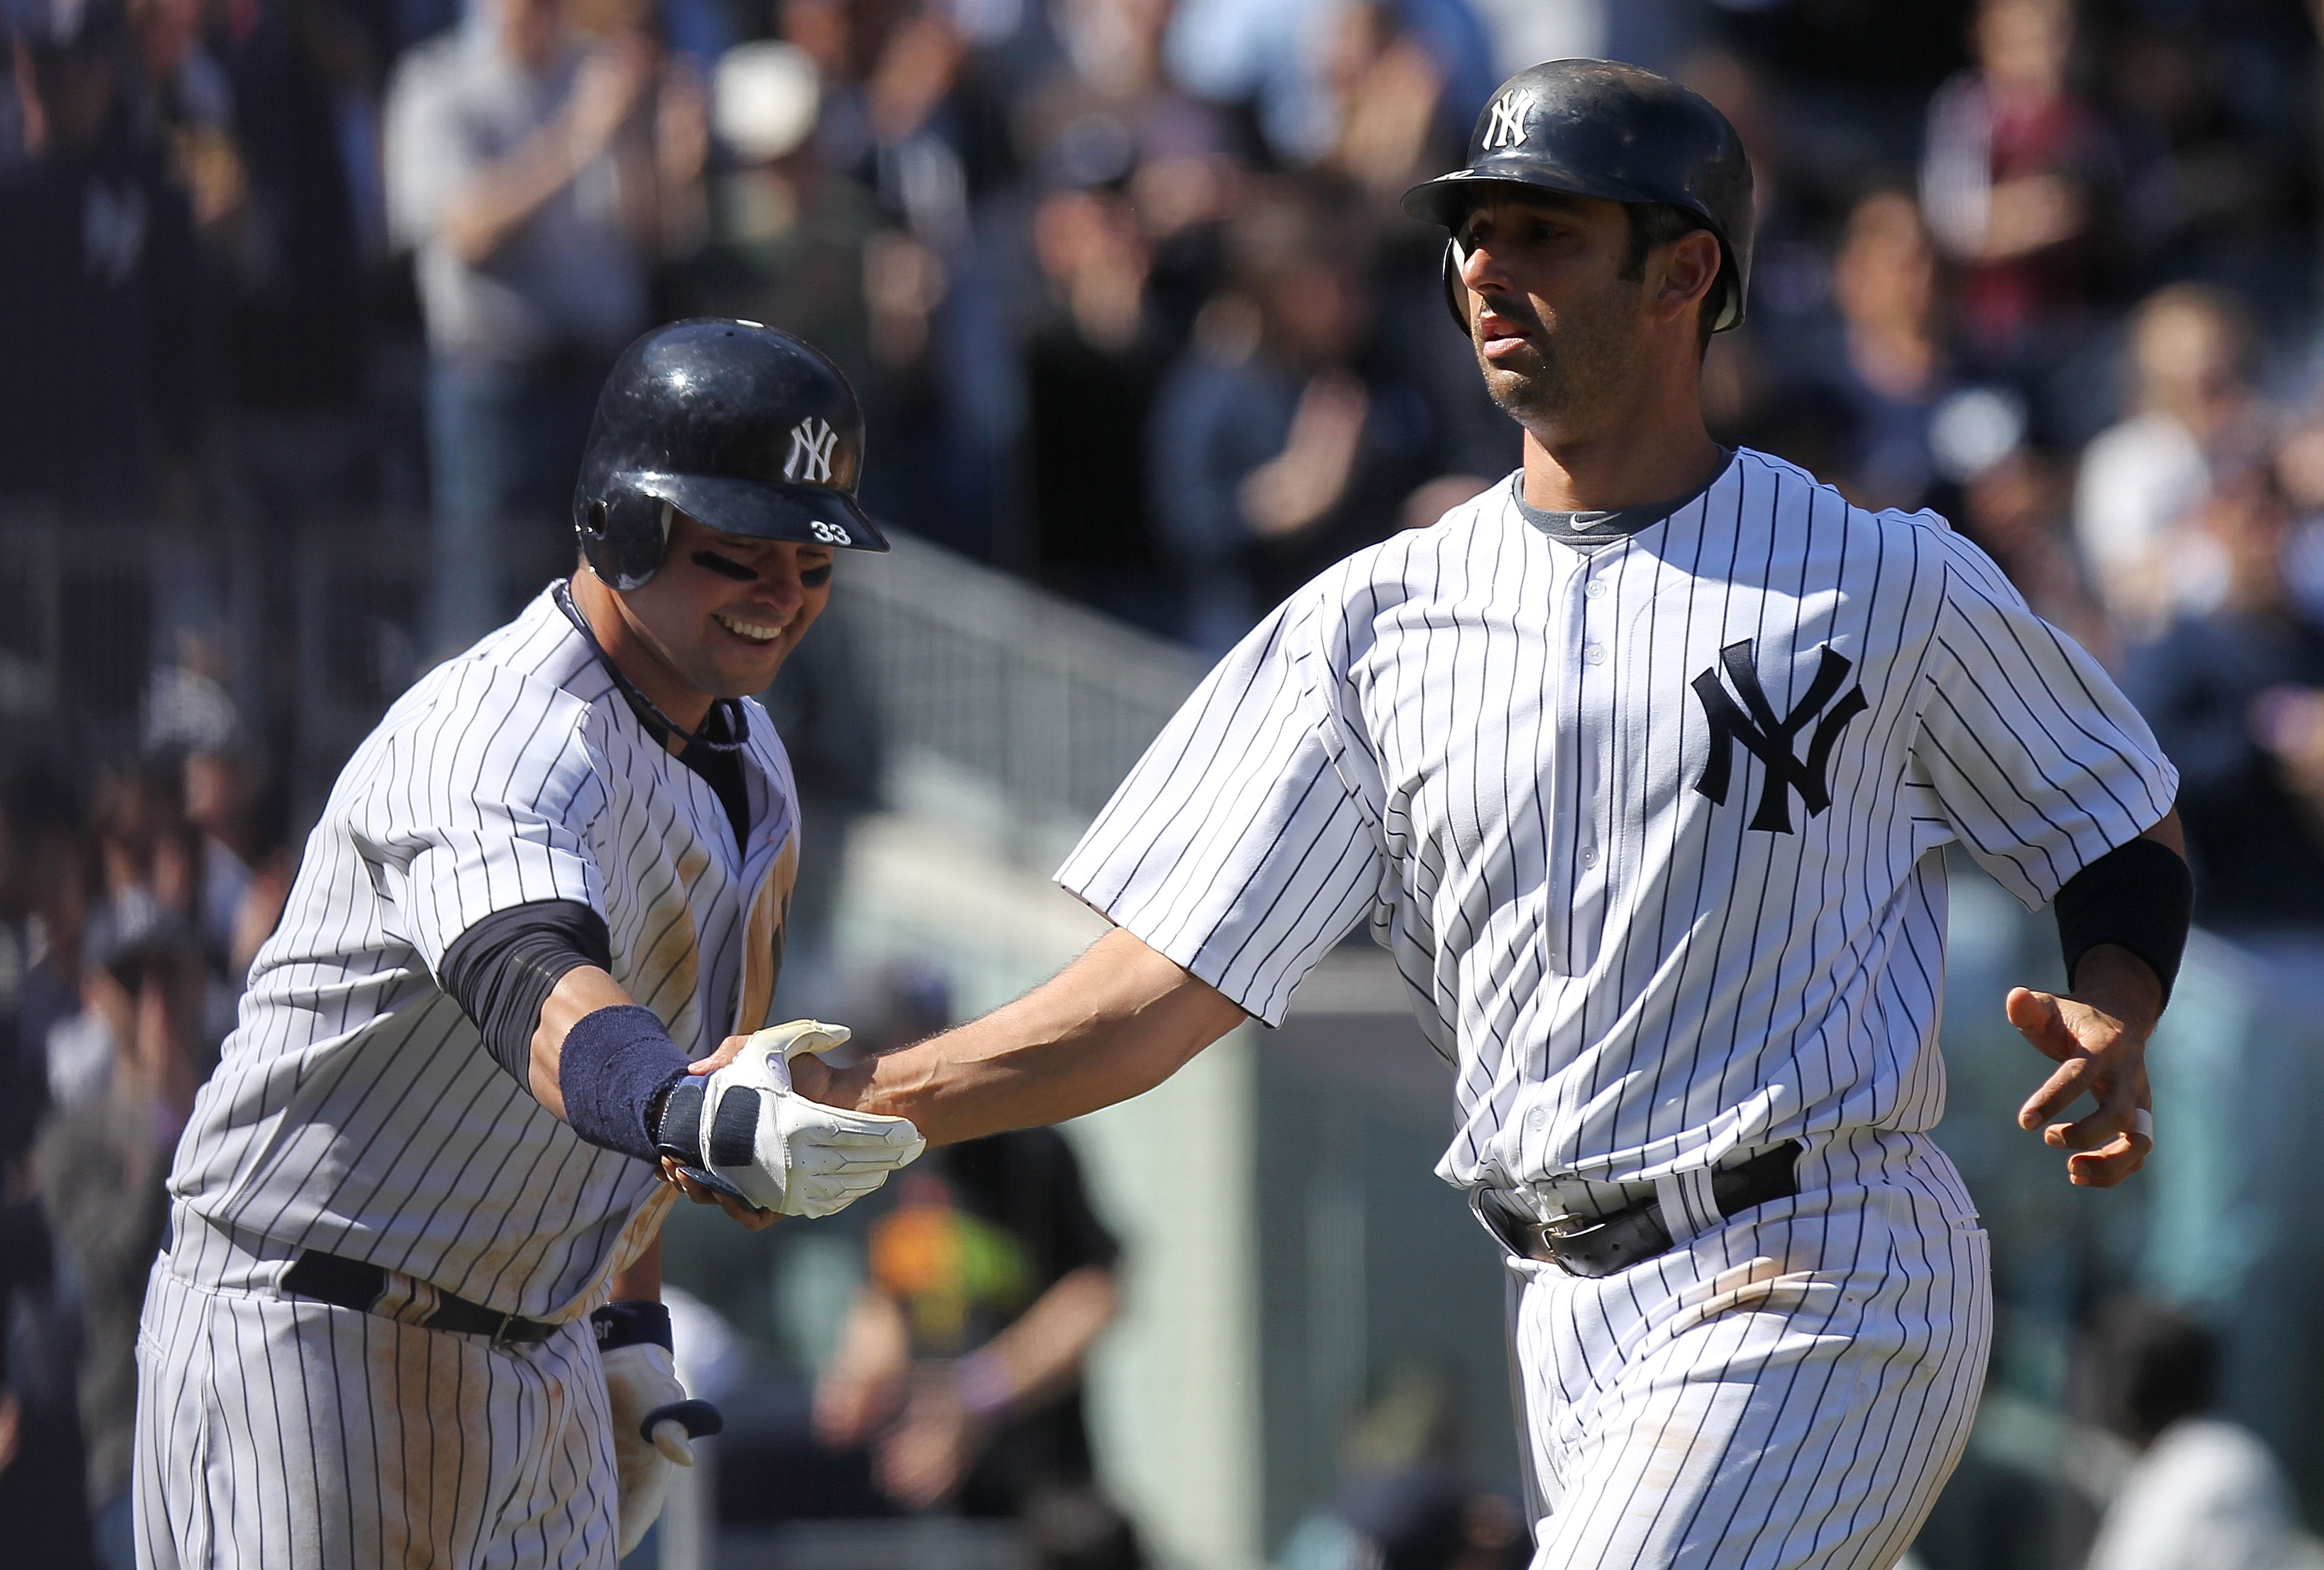 NEW YORK, NY - APRIL 03:  Jorge Posada #20 of the New York Yankees celebrates his second homerun with scoring runner Nick Swisher #33 against the Detroit Tigers at Yankee Stadium on April 3, 2011 in the Bronx borough of New York City.  (Photo by Nick Laha